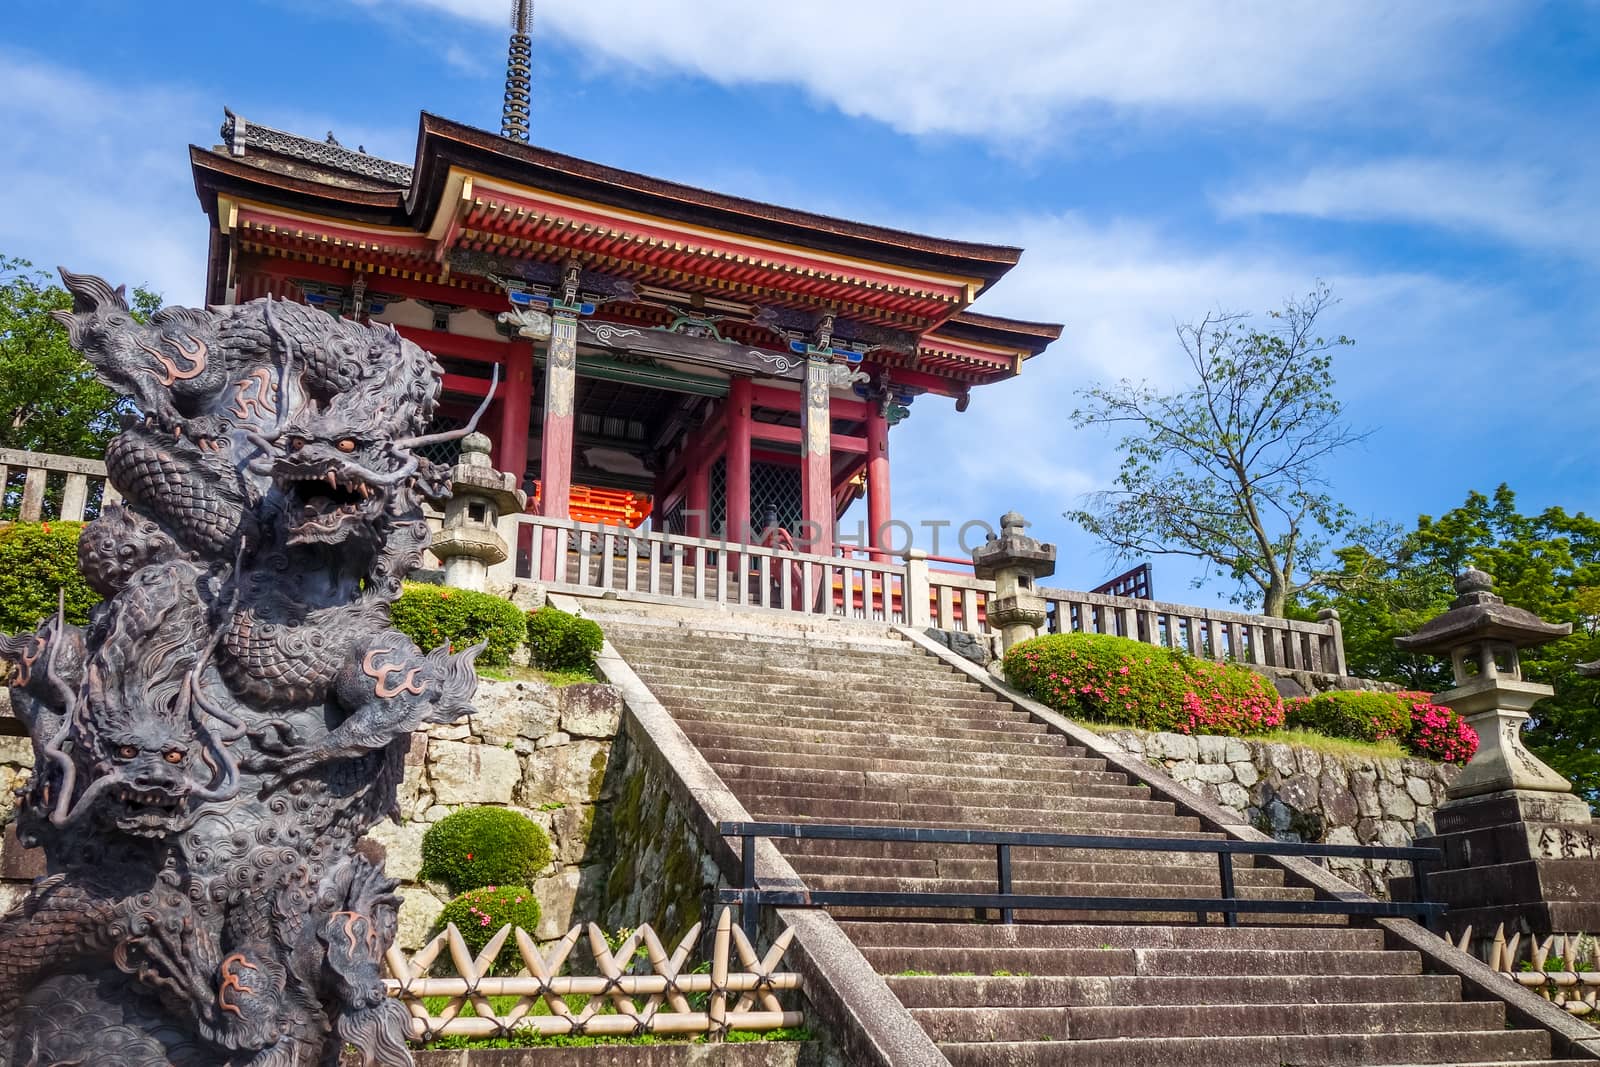 Dragon statue in front of the kiyomizu-dera temple, Kyoto, Japan by daboost